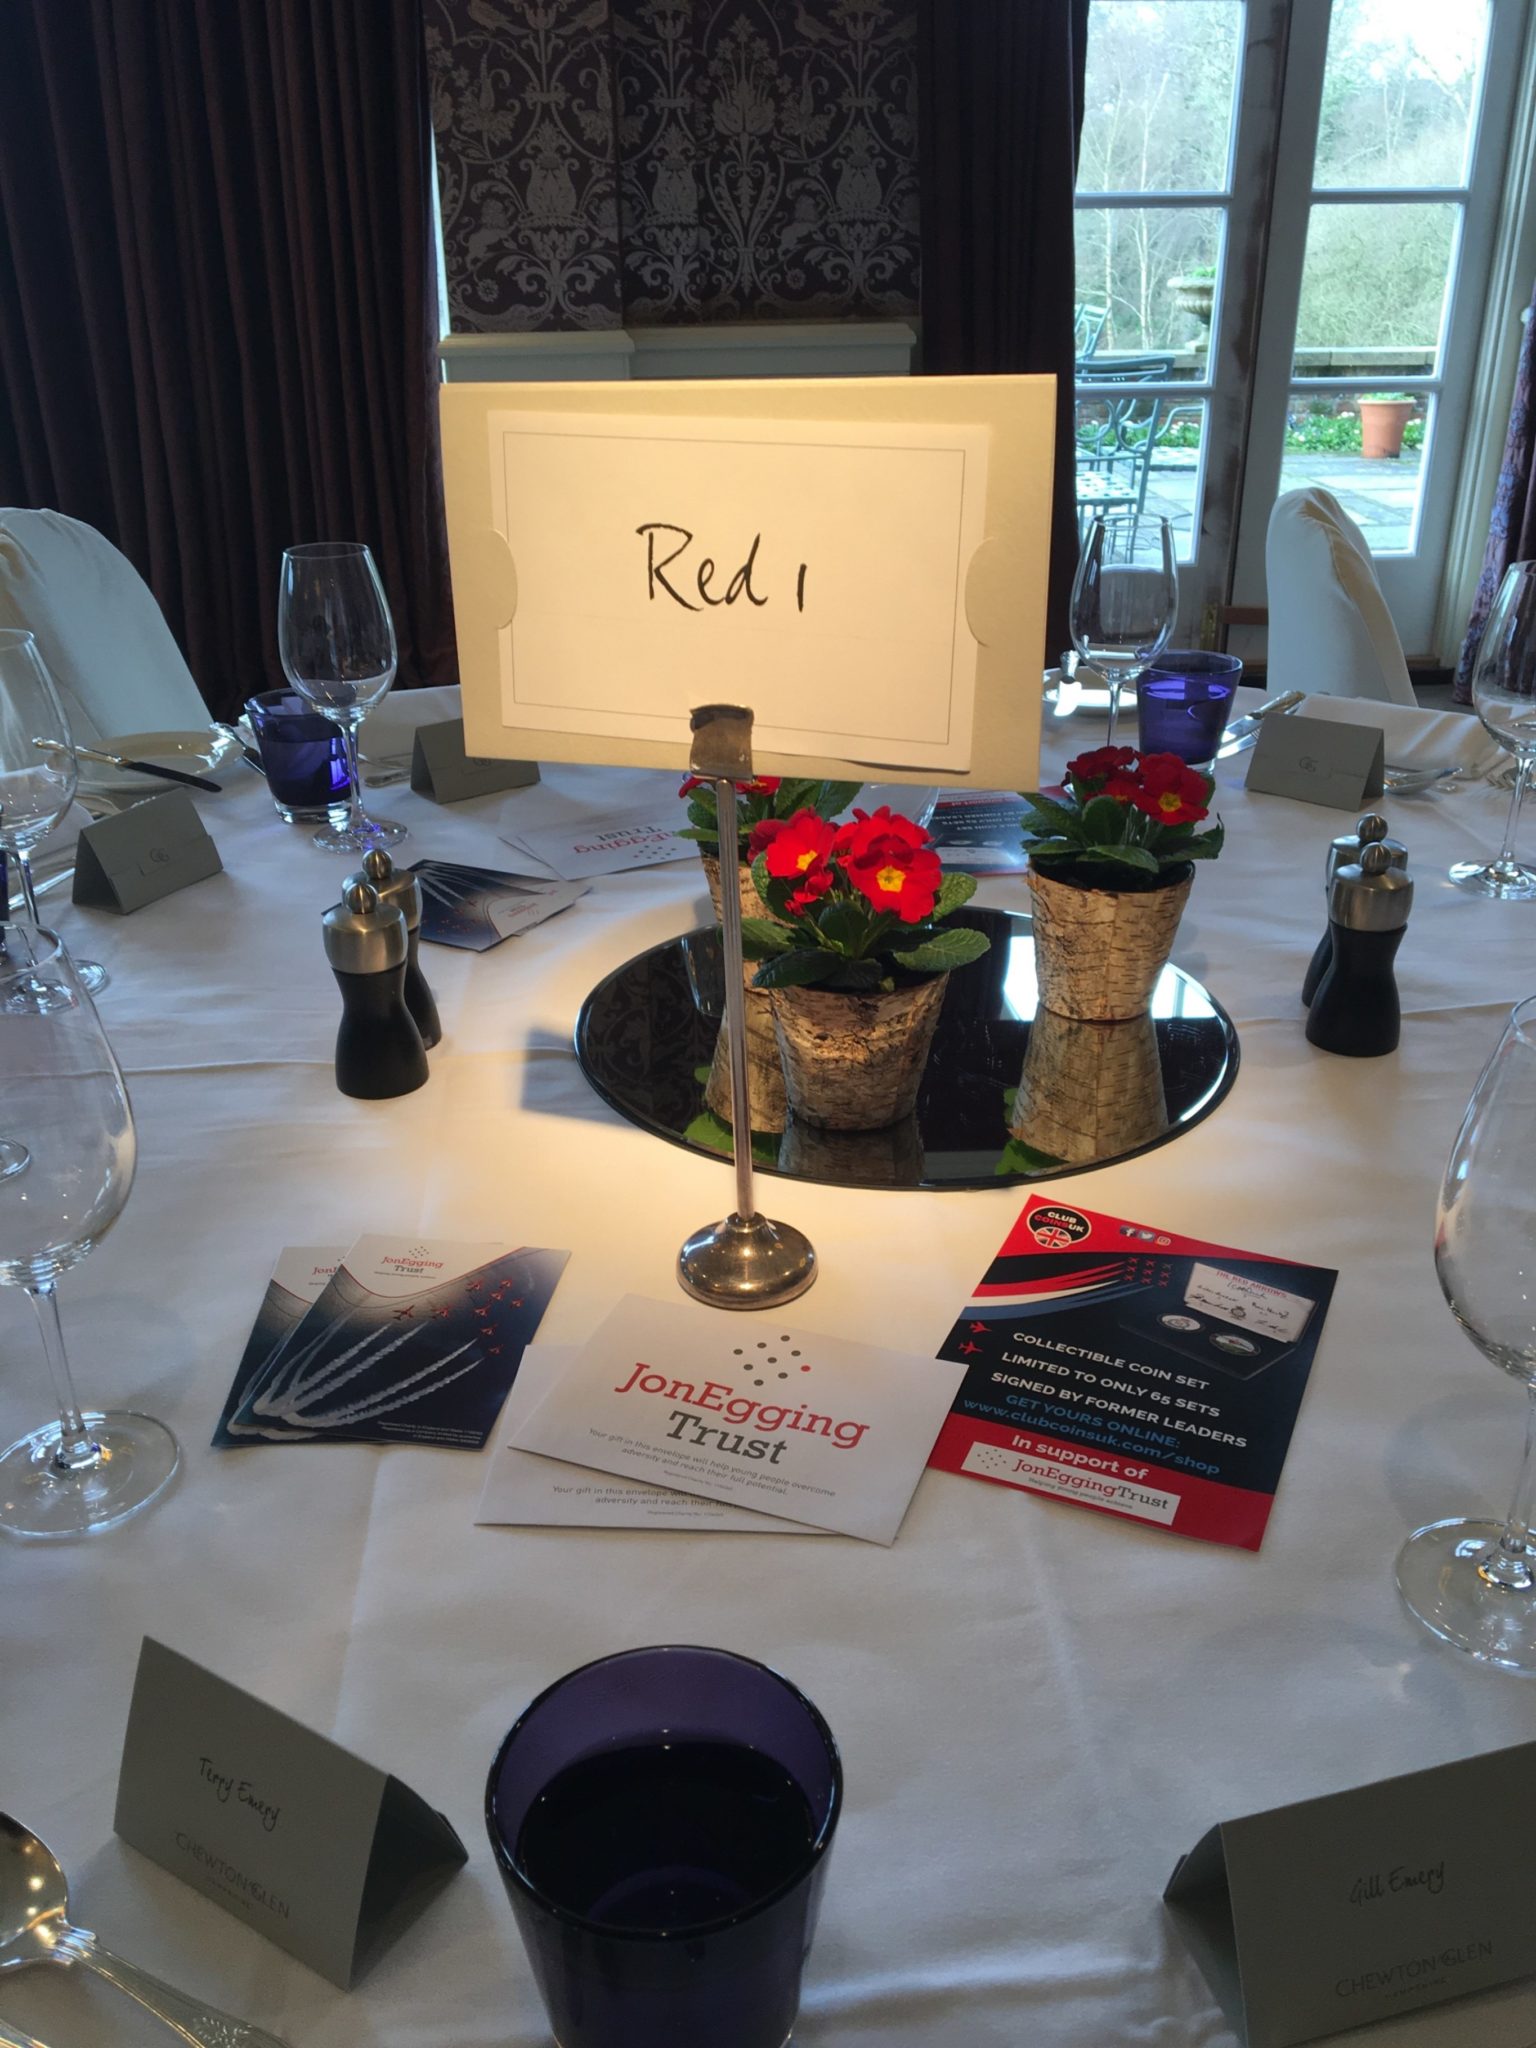 Justin Hughes special event luncheon at Chewton Glen